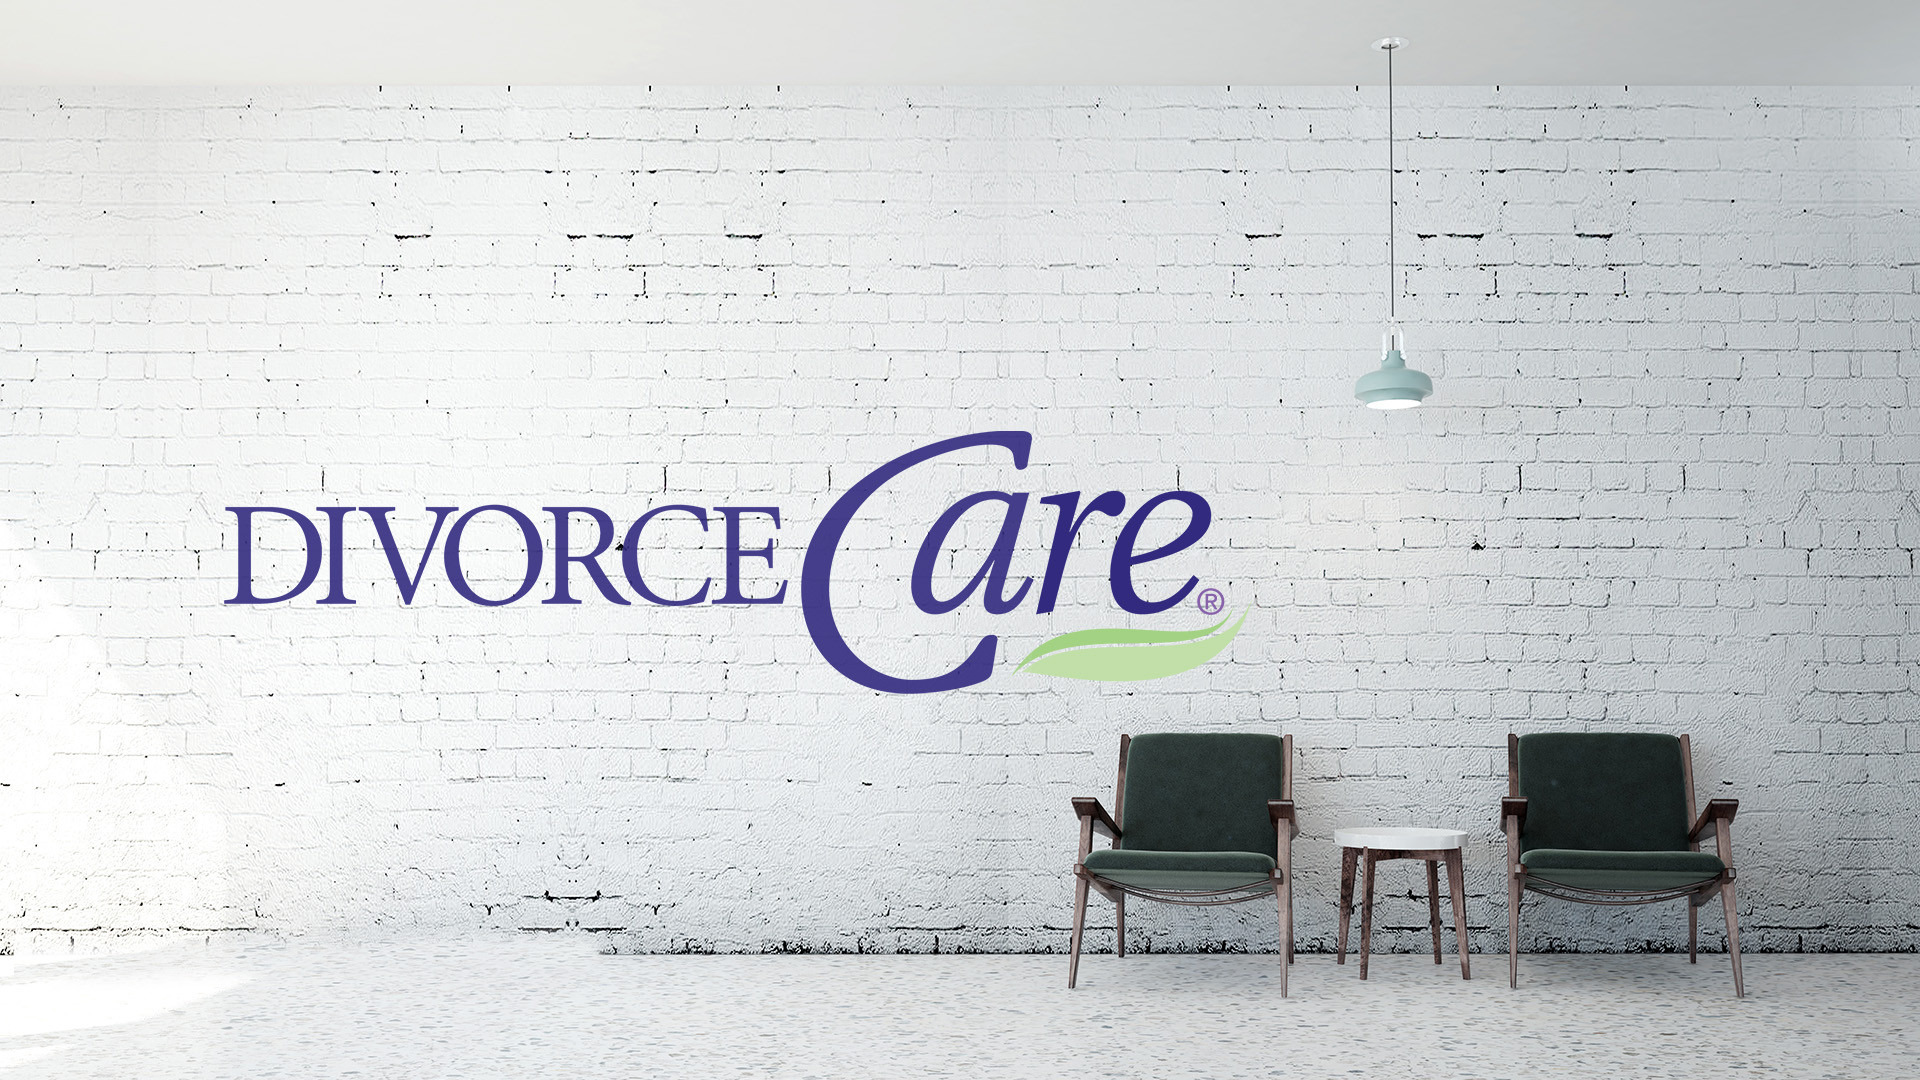 DivorceCare

13-Week Program 
Next session to be determined
Childcare is not offered
